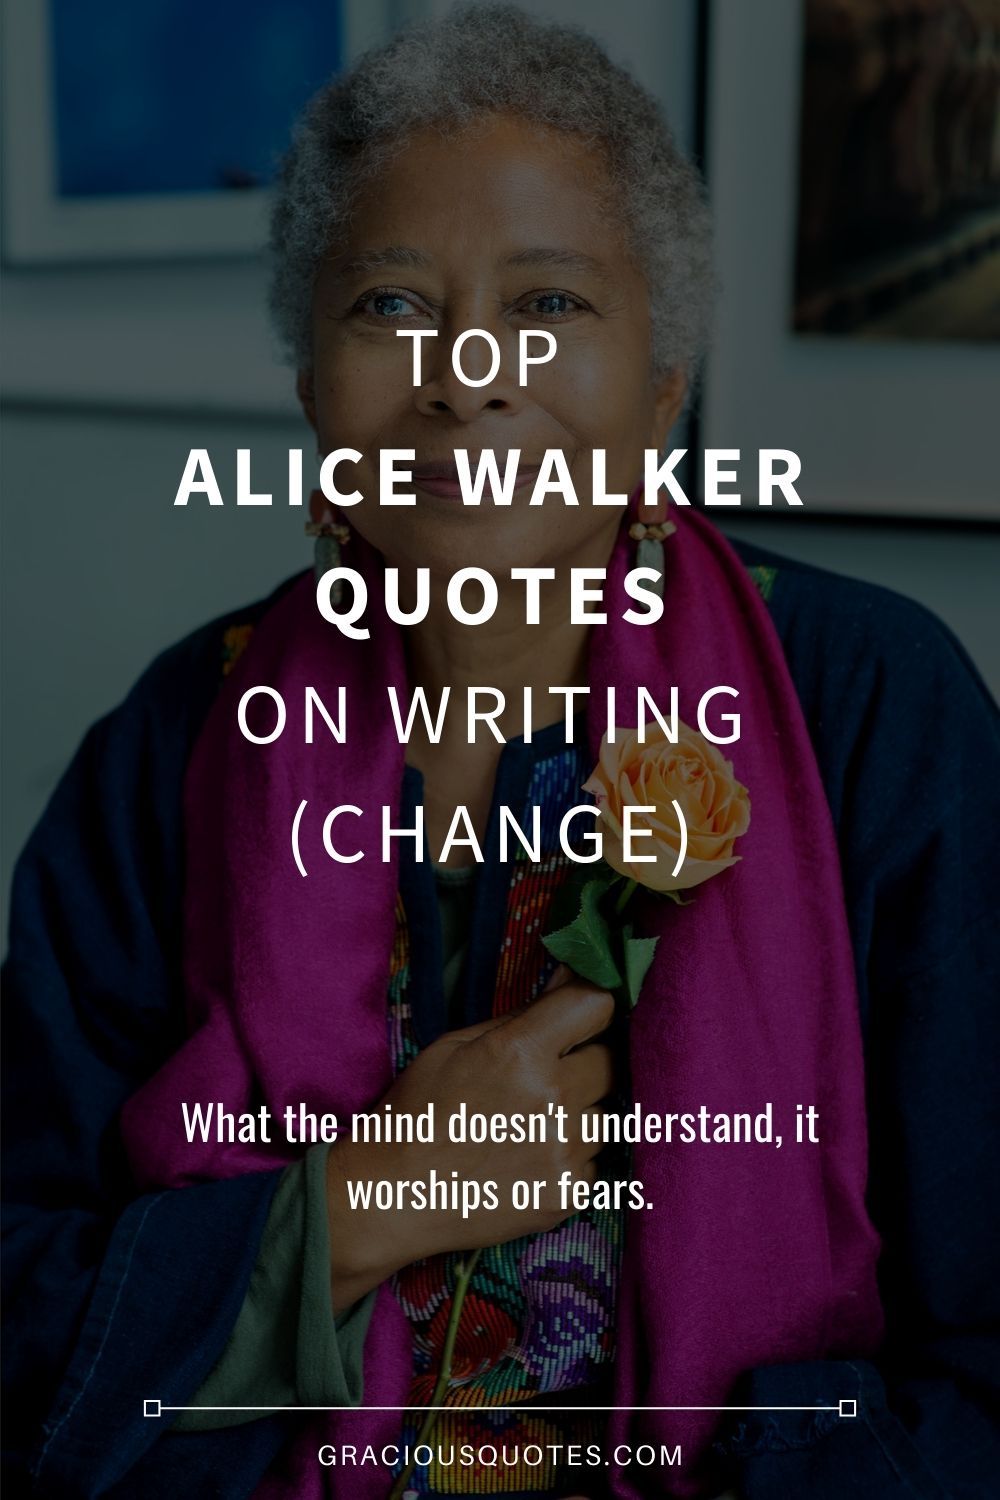 Top Alice Walker Quotes on Writing (CHANGE) - Gracious Quotes (EDITED)